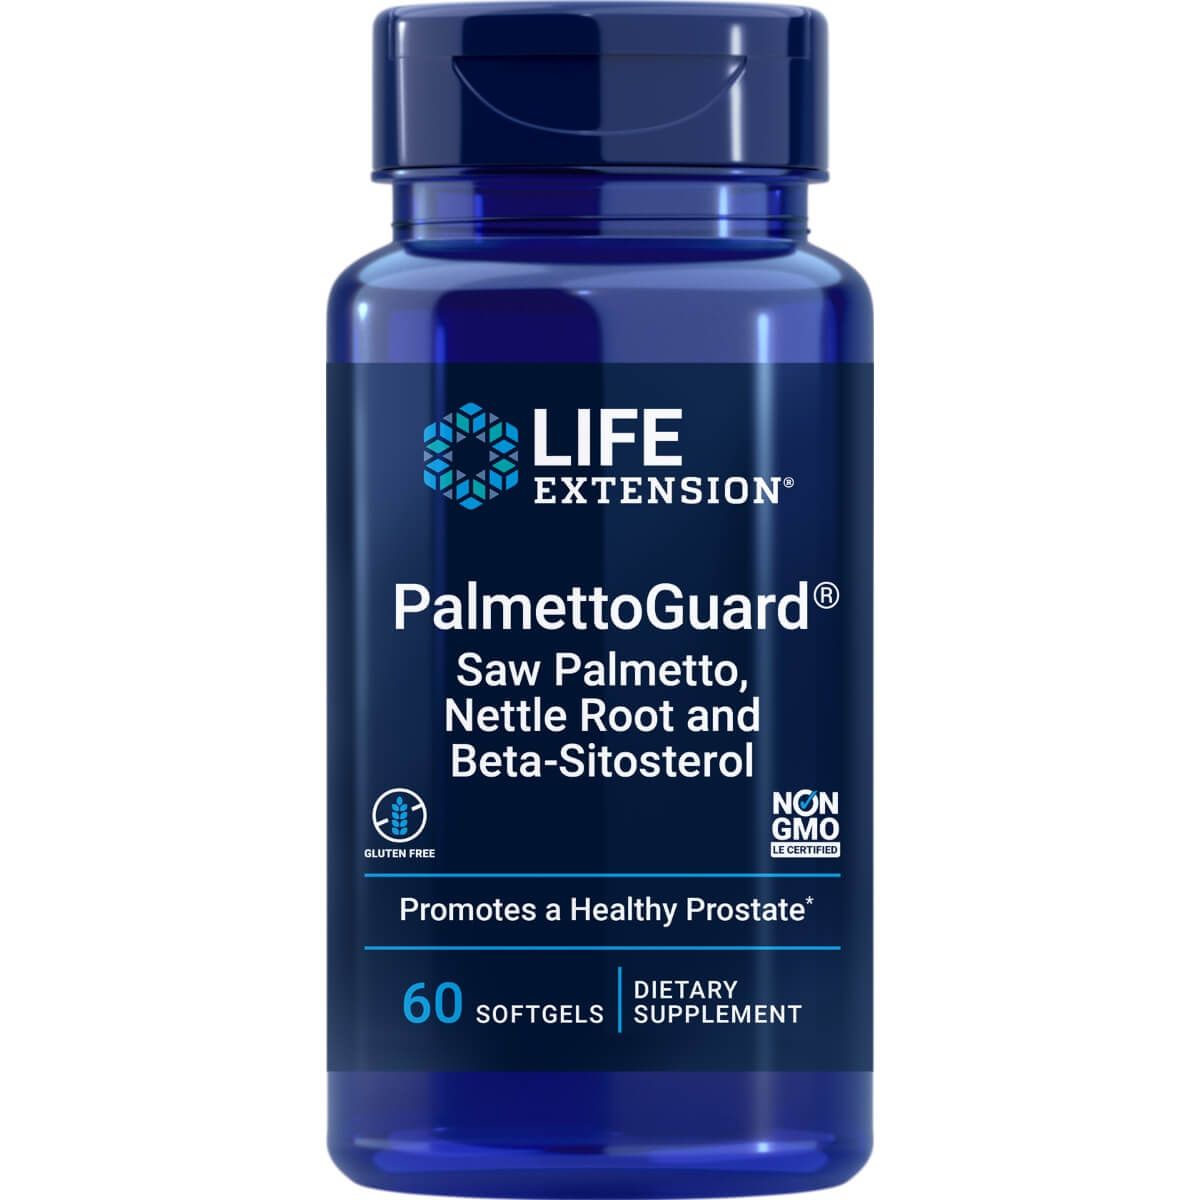 Photos - Vitamins & Minerals Life Extension PalmettoGuard Saw Palmetto/Nettle Root and Beta-Sitosterol 